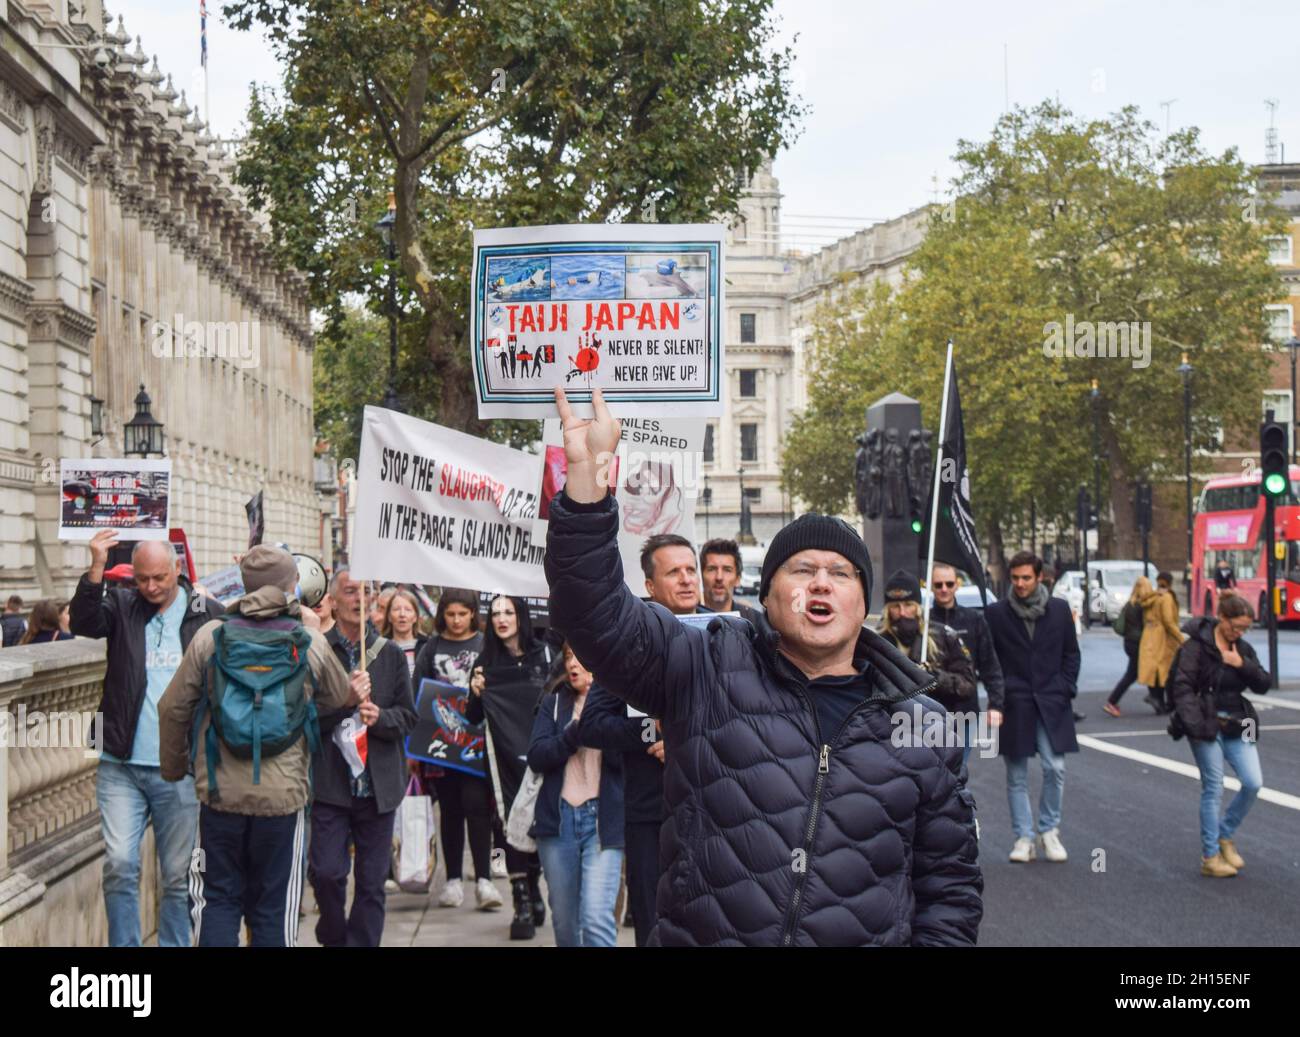 London, UK. 16th Oct, 2021. A protester holds a placard demanding an end to dolphin hunts in Taiji during the demonstration in Whitehall.Members of marine conservation organization Sea Shepherd and other activists marched through Westminster, calling for an end to the slaughter of dolphins in Faroe Islands and Taiji, Japan. (Photo by Vuk Valcic/SOPA Images/Sipa USA) Credit: Sipa USA/Alamy Live News Stock Photo